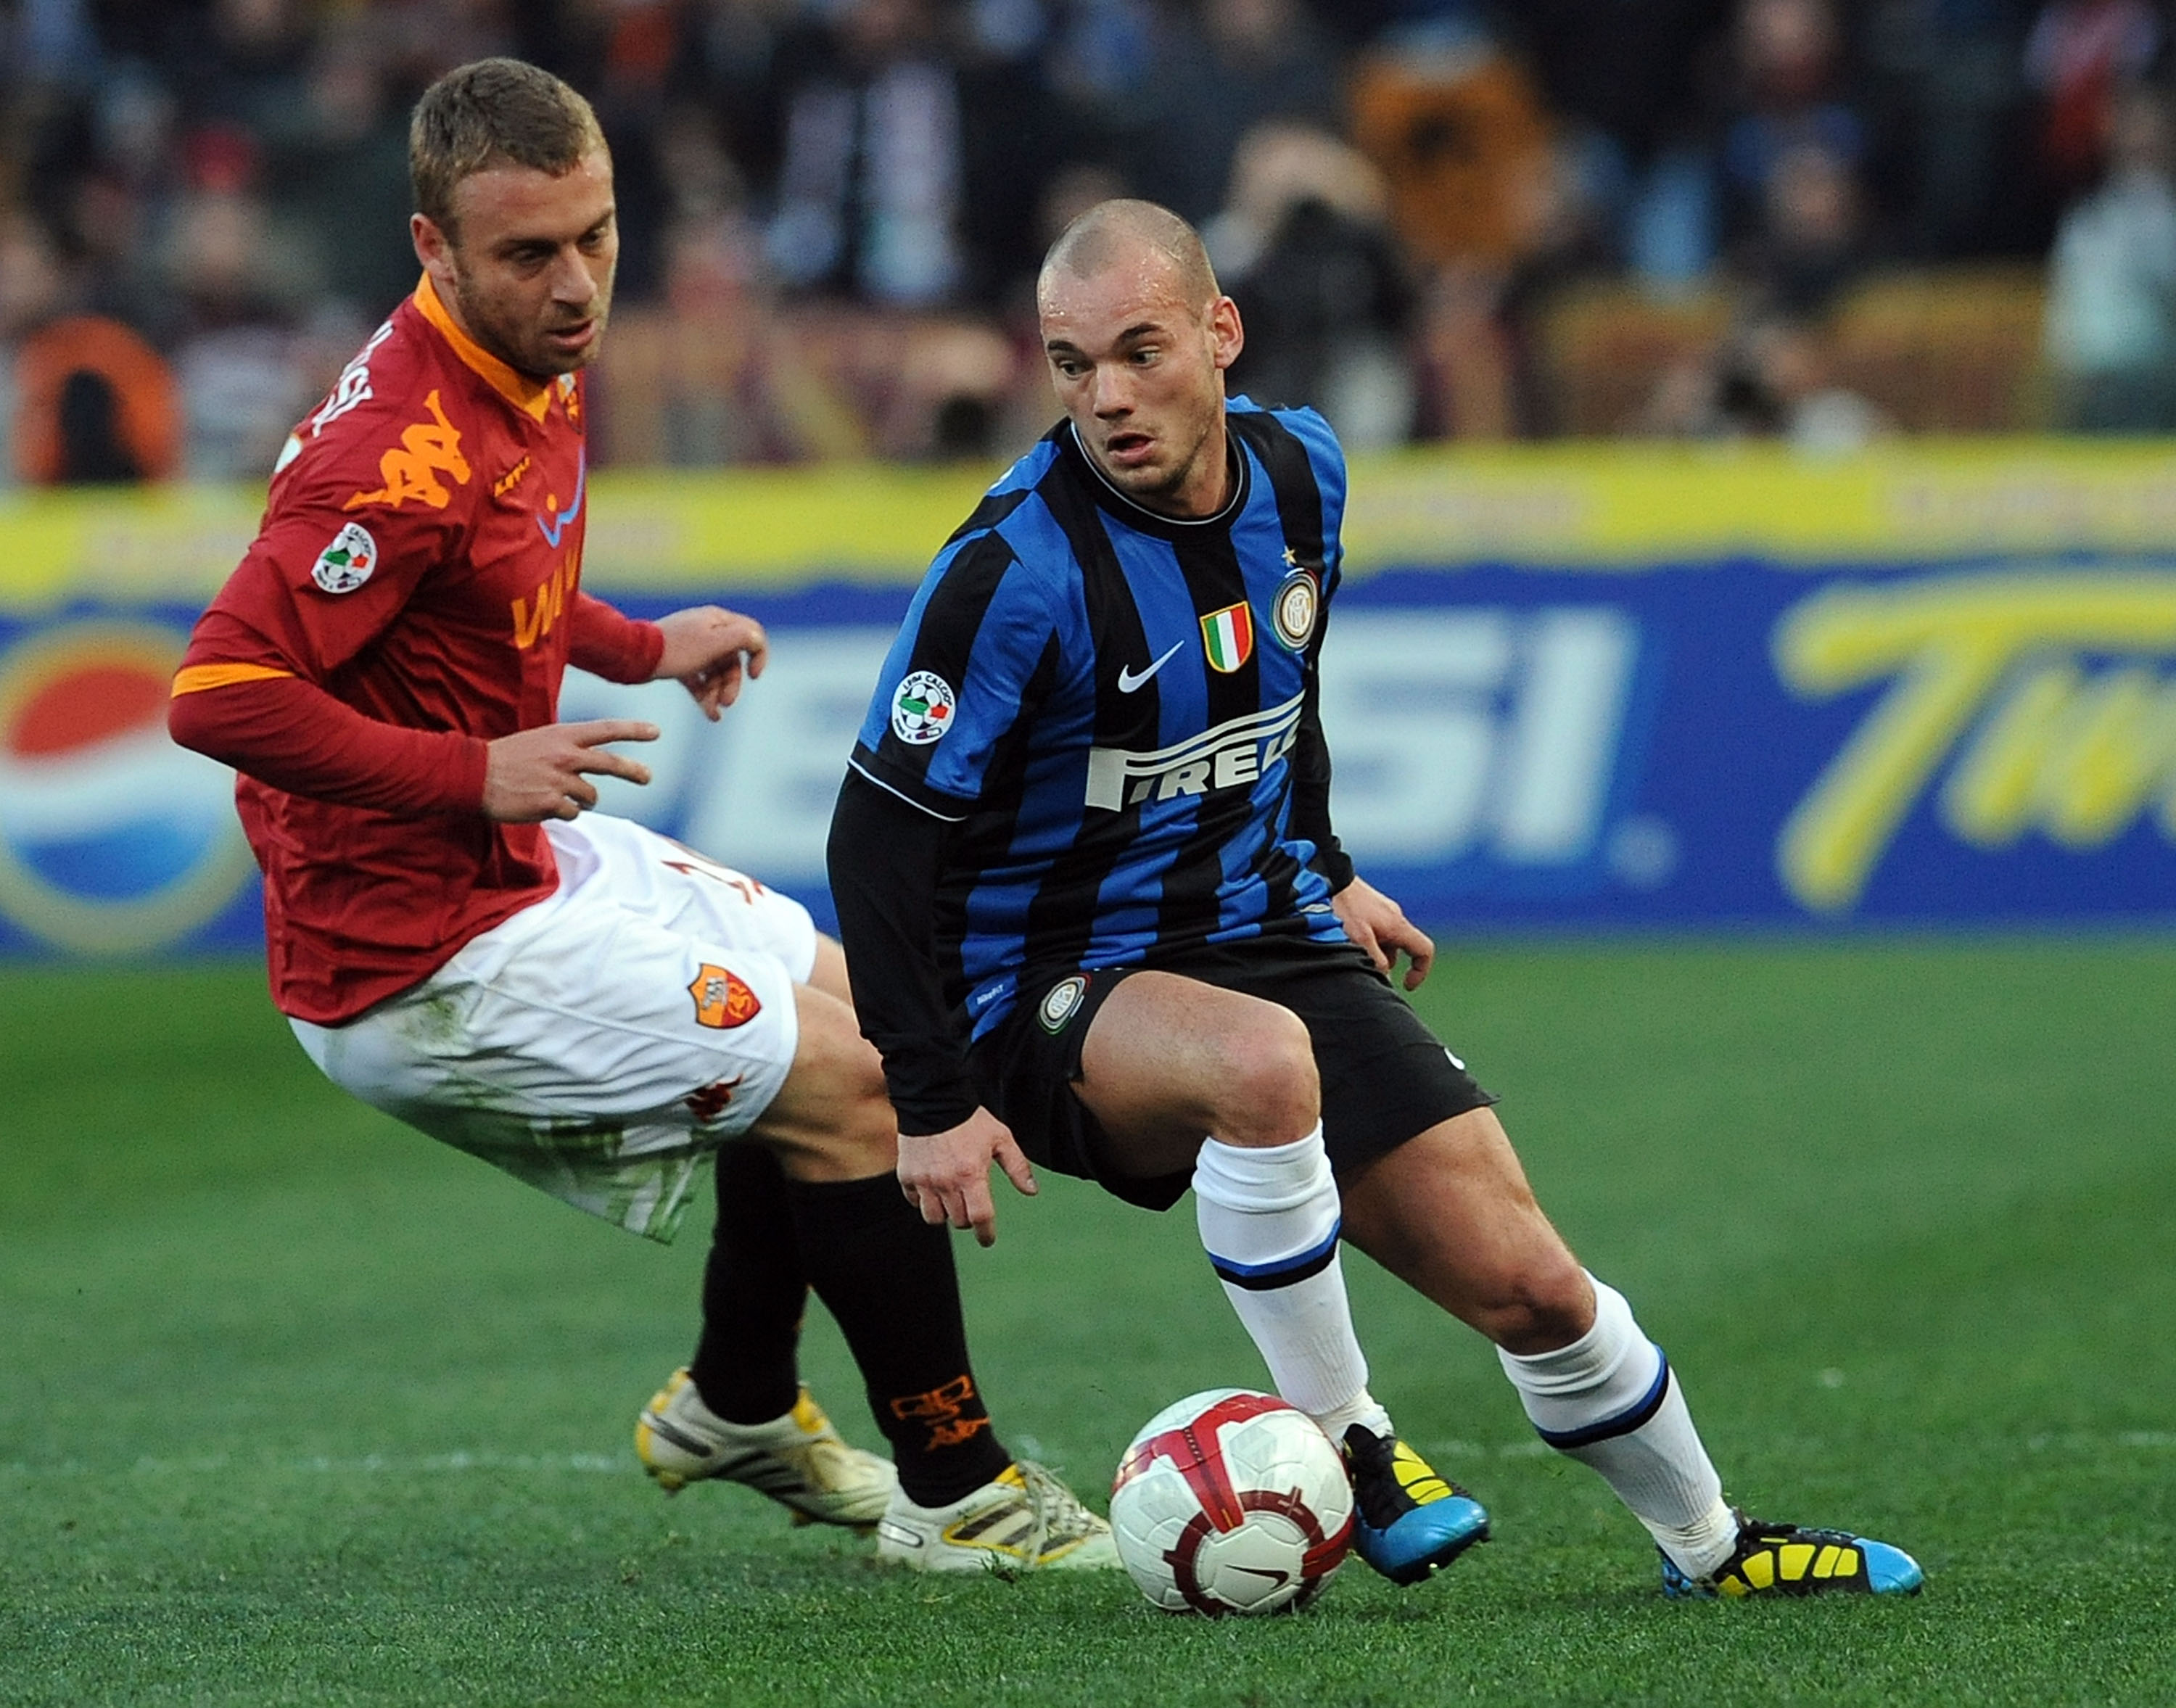 ROME - MARCH 27:  Daniele De Rossi of Roma and Wesley Sneijder of Inter in action during the Serie A match between AS Roma and FC Internazionale Milano at Stadio Olimpico on March 27, 2010 in Rome, Italy.  (Photo by Giuseppe Bellini/Getty Images)